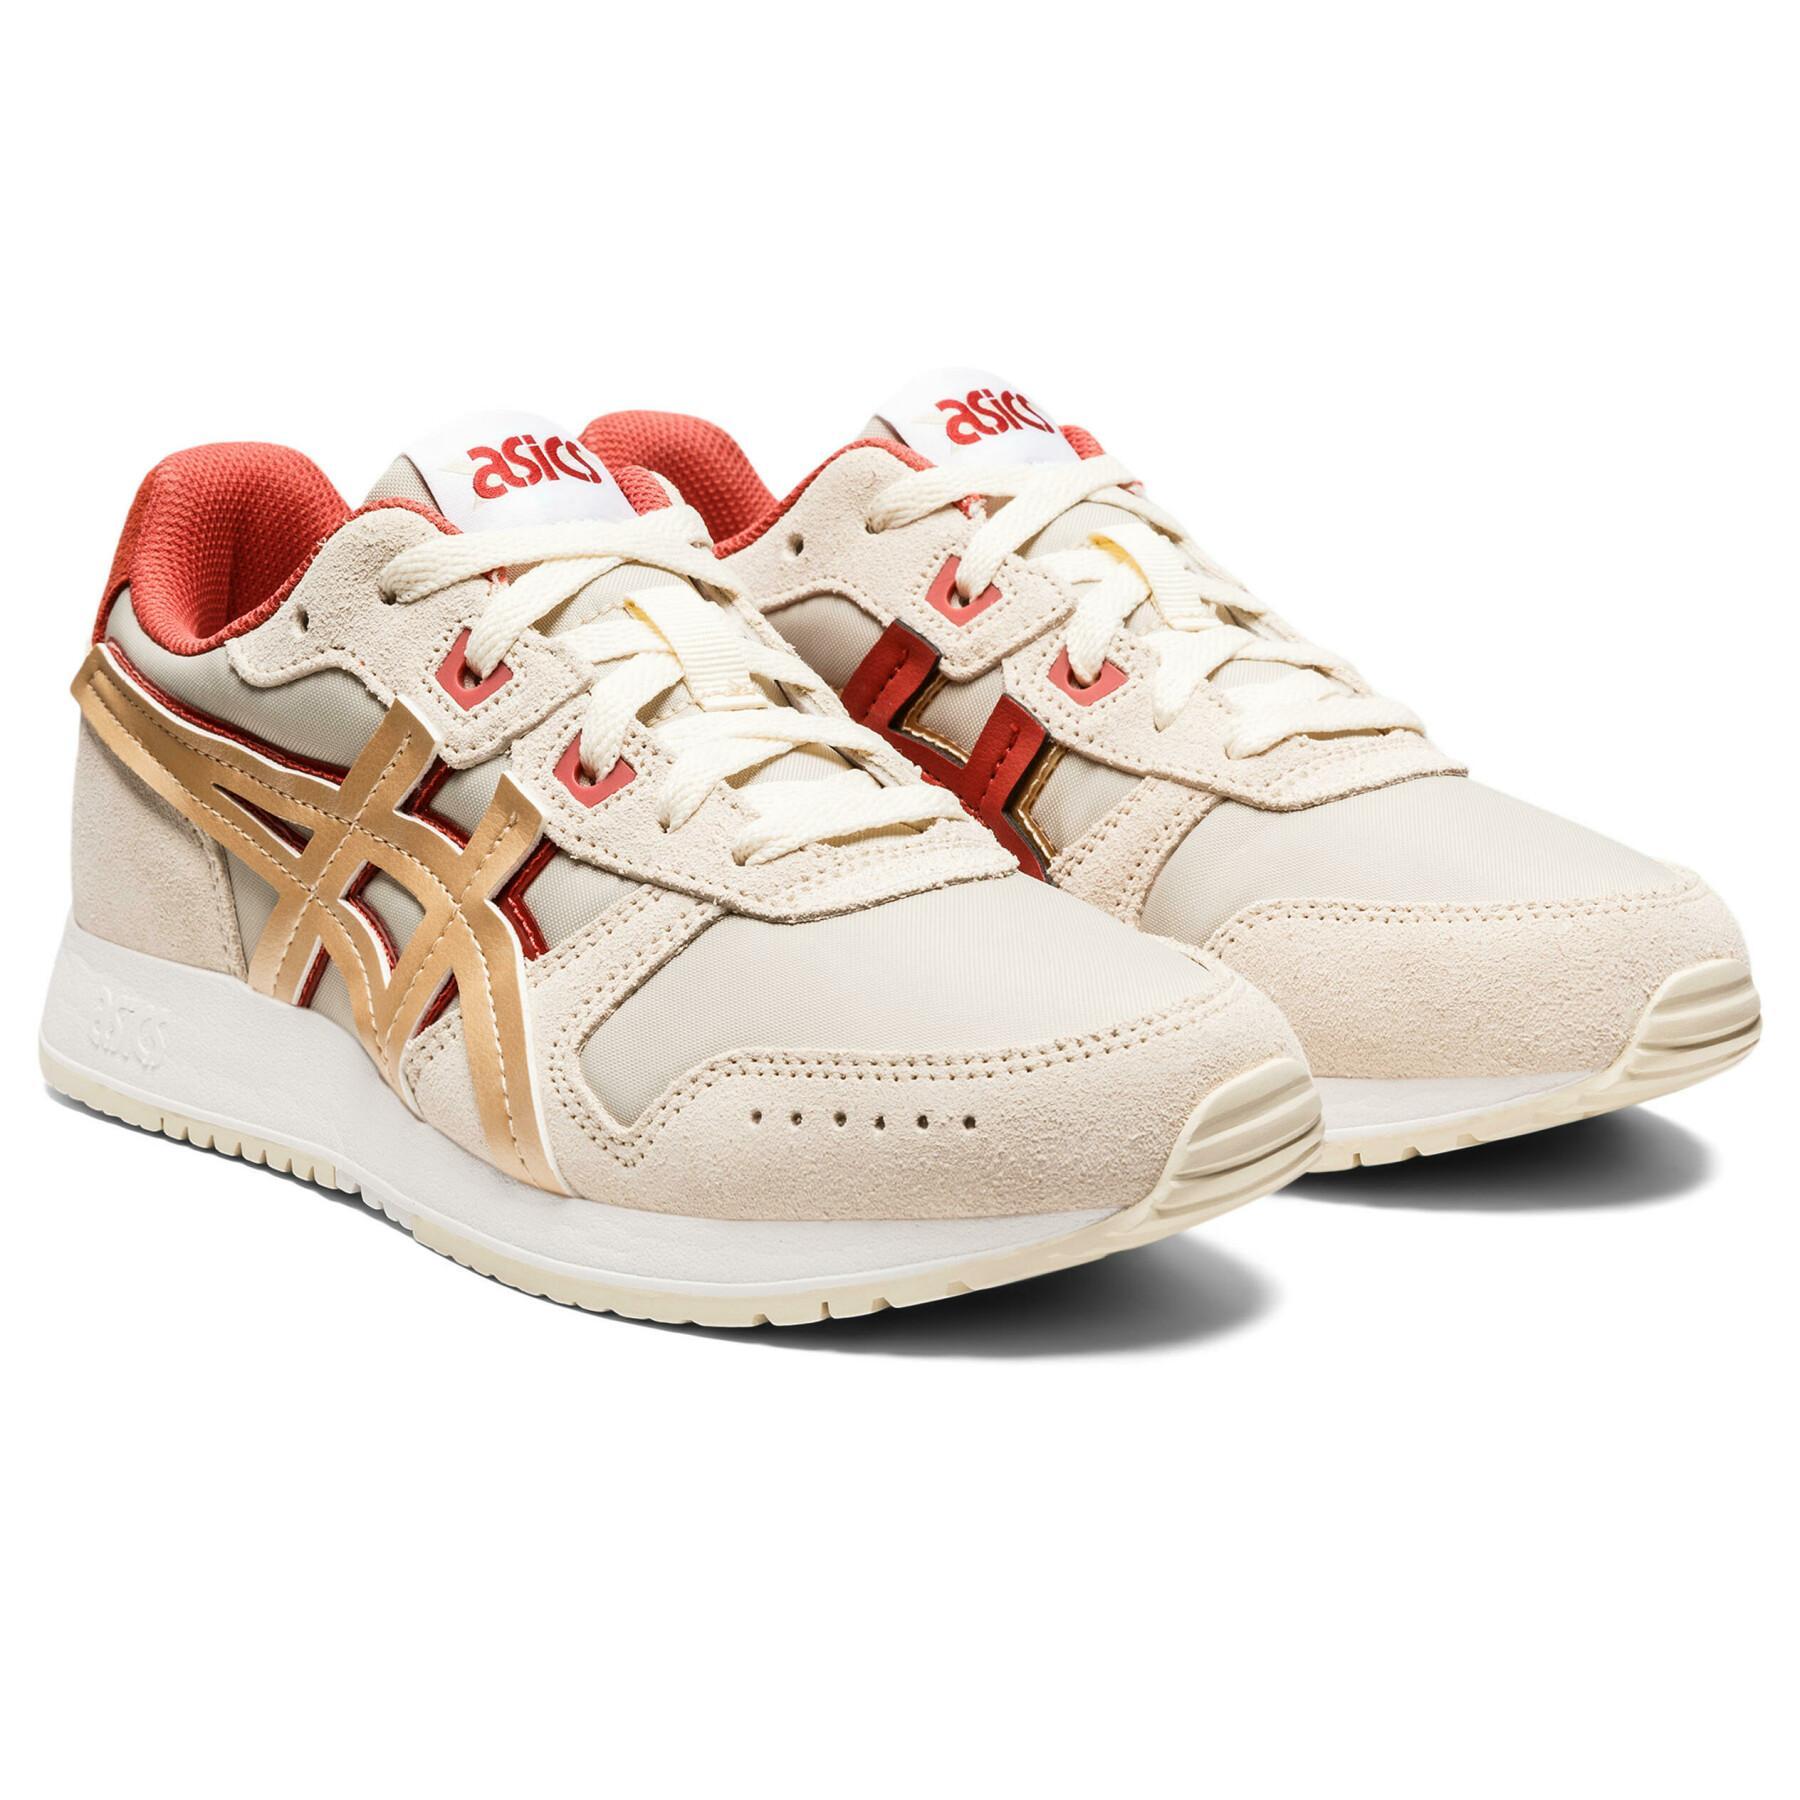 Chaussures femme Asics Lyte Classic